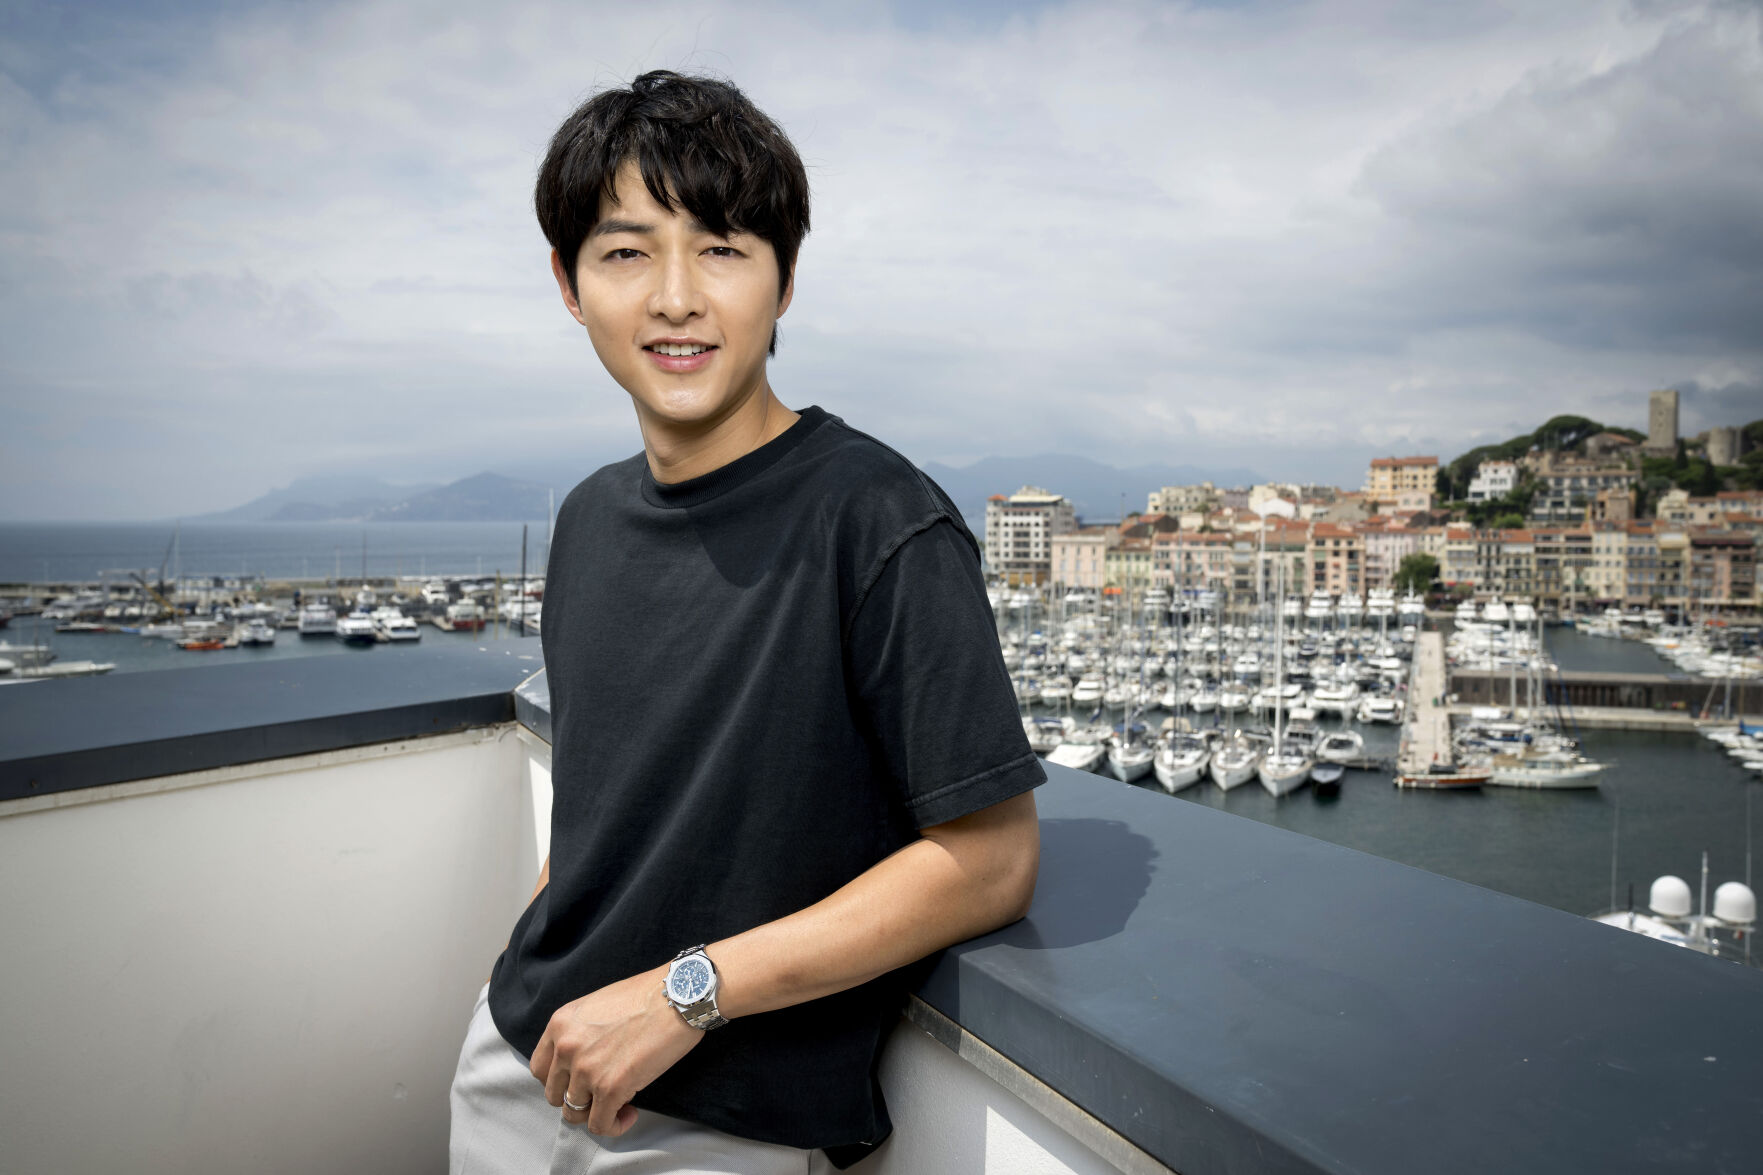 Song Joong Ki poses for portrait photographs for the film 'Hopeless' at the 76th international film festival, Cannes, southern France, Thursday, May 25, 2023.